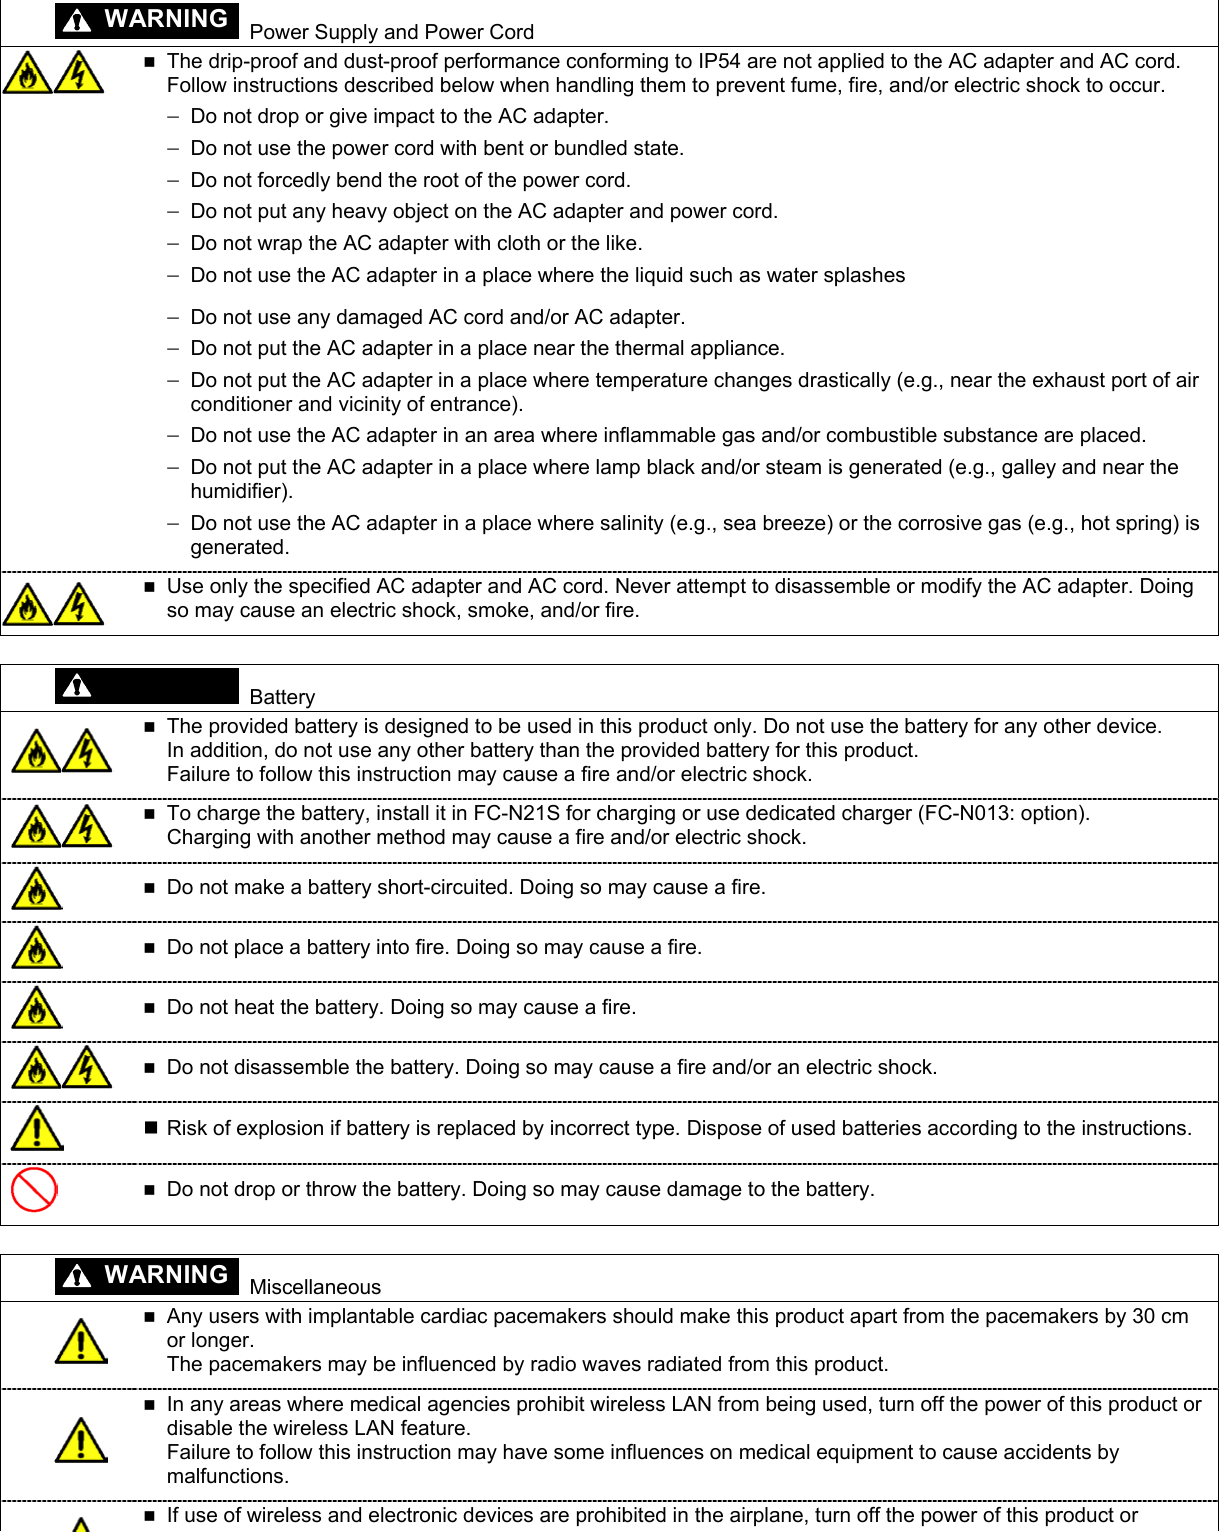 WARNING   Power Supply and Power Cord   The drip-proof and dust-proof performance conforming to IP54 are not applied to the AC adapter and AC cord. Follow instructions described below when handling them to prevent fume, fire, and/or electric shock to occur.  − − − − − − − − − − − Do not drop or give impact to the AC adapter. Do not use the power cord with bent or bundled state. Do not forcedly bend the root of the power cord. Do not put any heavy object on the AC adapter and power cord. Do not wrap the AC adapter with cloth or the like. Do not use the AC adapter in a place where the liquid such as water splashes Do not use any damaged AC cord and/or AC adapter. Do not put the AC adapter in a place near the thermal appliance. Do not put the AC adapter in a place where temperature changes drastically (e.g., near the exhaust port of air conditioner and vicinity of entrance). −  Do not use the AC adapter in an area where inflammable gas and/or combustible substance are placed. Do not put the AC adapter in a place where lamp black and/or steam is generated (e.g., galley and near the humidifier). Do not use the AC adapter in a place where salinity (e.g., sea breeze) or the corrosive gas (e.g., hot spring) is generated.   Use only the specified AC adapter and AC cord. Never attempt to disassemble or modify the AC adapter. Doing so may cause an electric shock, smoke, and/or fire. WARNING  Battery   The provided battery is designed to be used in this product only. Do not use the battery for any other device. In addition, do not use any other battery than the provided battery for this product. Failure to follow this instruction may cause a fire and/or electric shock.   To charge the battery, install it in FC-N21S for charging or use dedicated charger (FC-N013: option). Charging with another method may cause a fire and/or electric shock.   Do not make a battery short-circuited. Doing so may cause a fire.   Do not place a battery into fire. Doing so may cause a fire.   Do not heat the battery. Doing so may cause a fire.   Do not disassemble the battery. Doing so may cause a fire and/or an electric shock.   Risk of explosion if battery is replaced by incorrect type. Dispose of used batteries according to the instructions.   Do not drop or throw the battery. Doing so may cause damage to the battery.   Miscellaneous   Any users with implantable cardiac pacemakers should make this product apart from the pacemakers by 30 cm or longer.   The pacemakers may be influenced by radio waves radiated from this product.   In any areas where medical agencies prohibit wireless LAN from being used, turn off the power of this product or disable the wireless LAN feature. Failure to follow this instruction may have some influences on medical equipment to cause accidents by malfunctions.  If use of wireless and electronic devices are prohibited in the airplane, turn off the power of this product or  WARNING